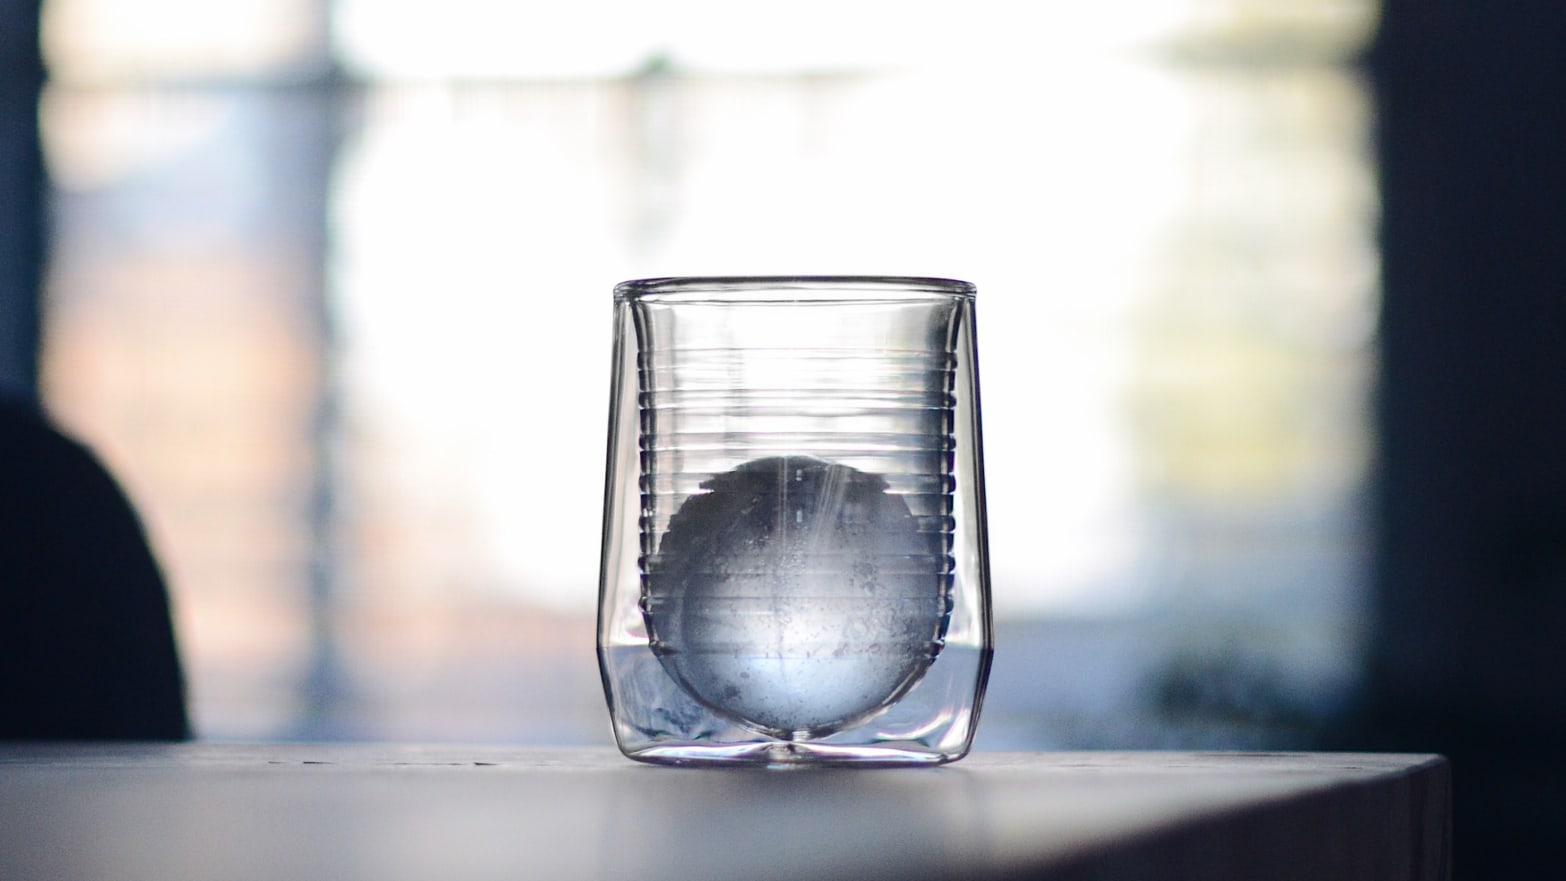 These Whiskey Glasses Are Hand-Blown and Come With Ice Ball Molds